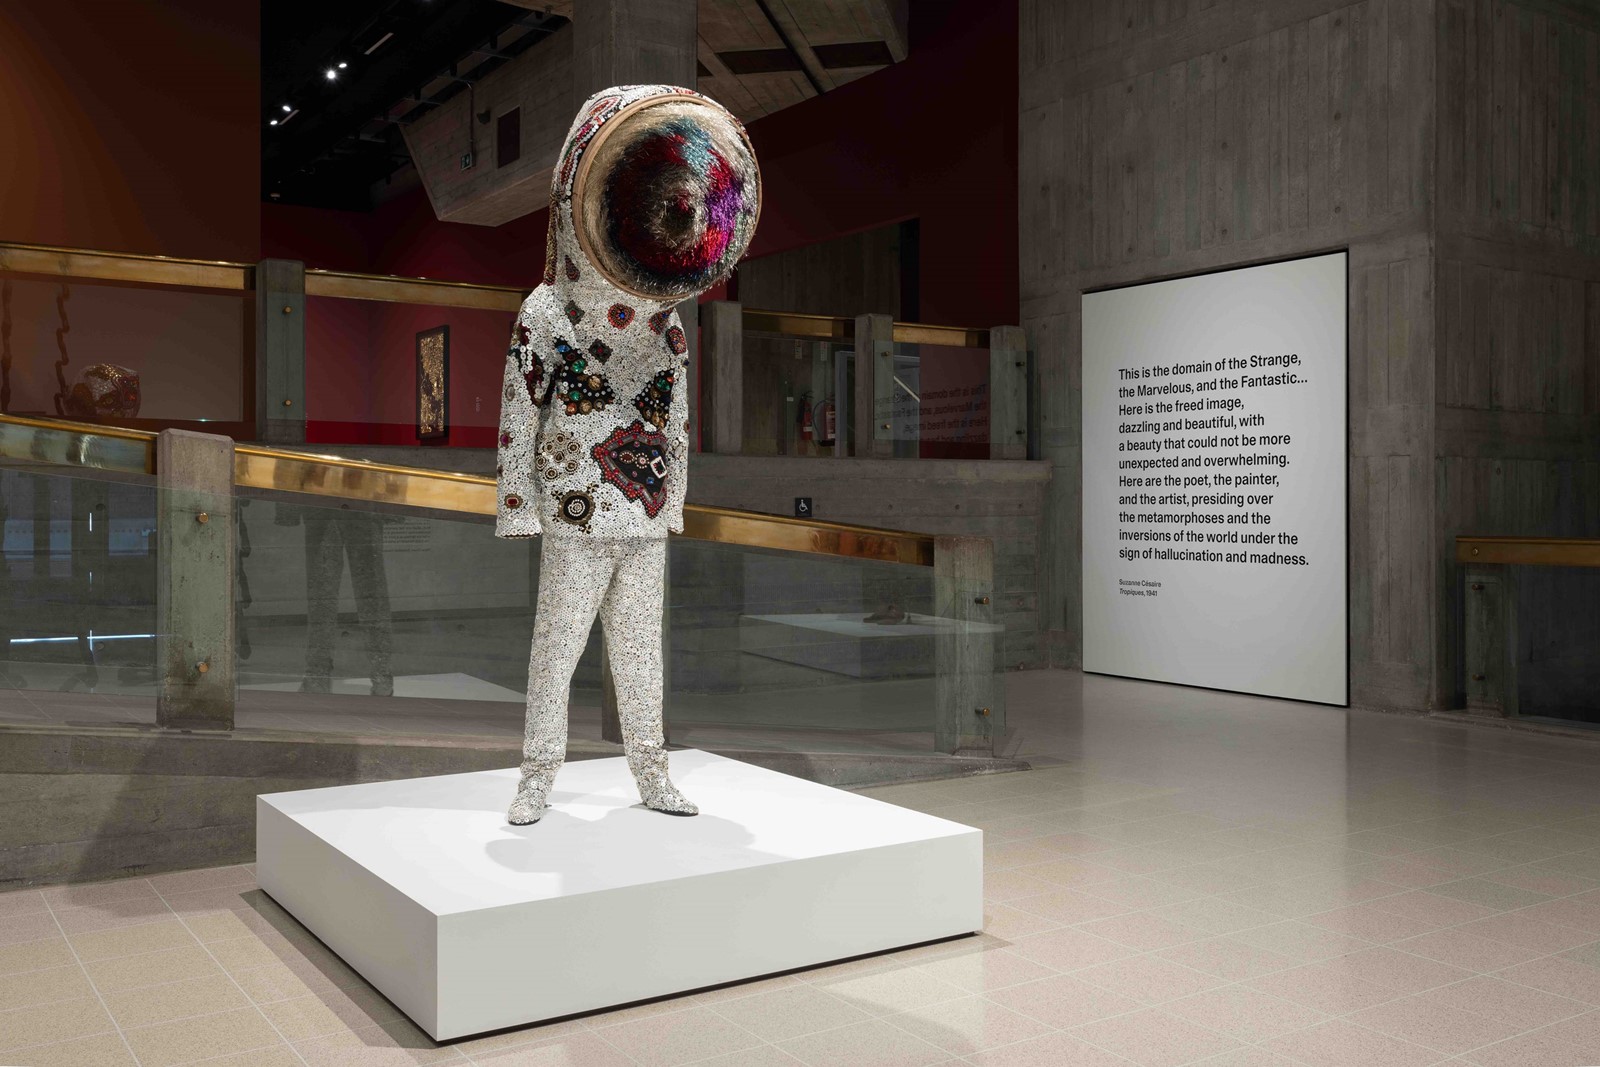 Installation View of Nick Cave, Soundsuit, 2014 at